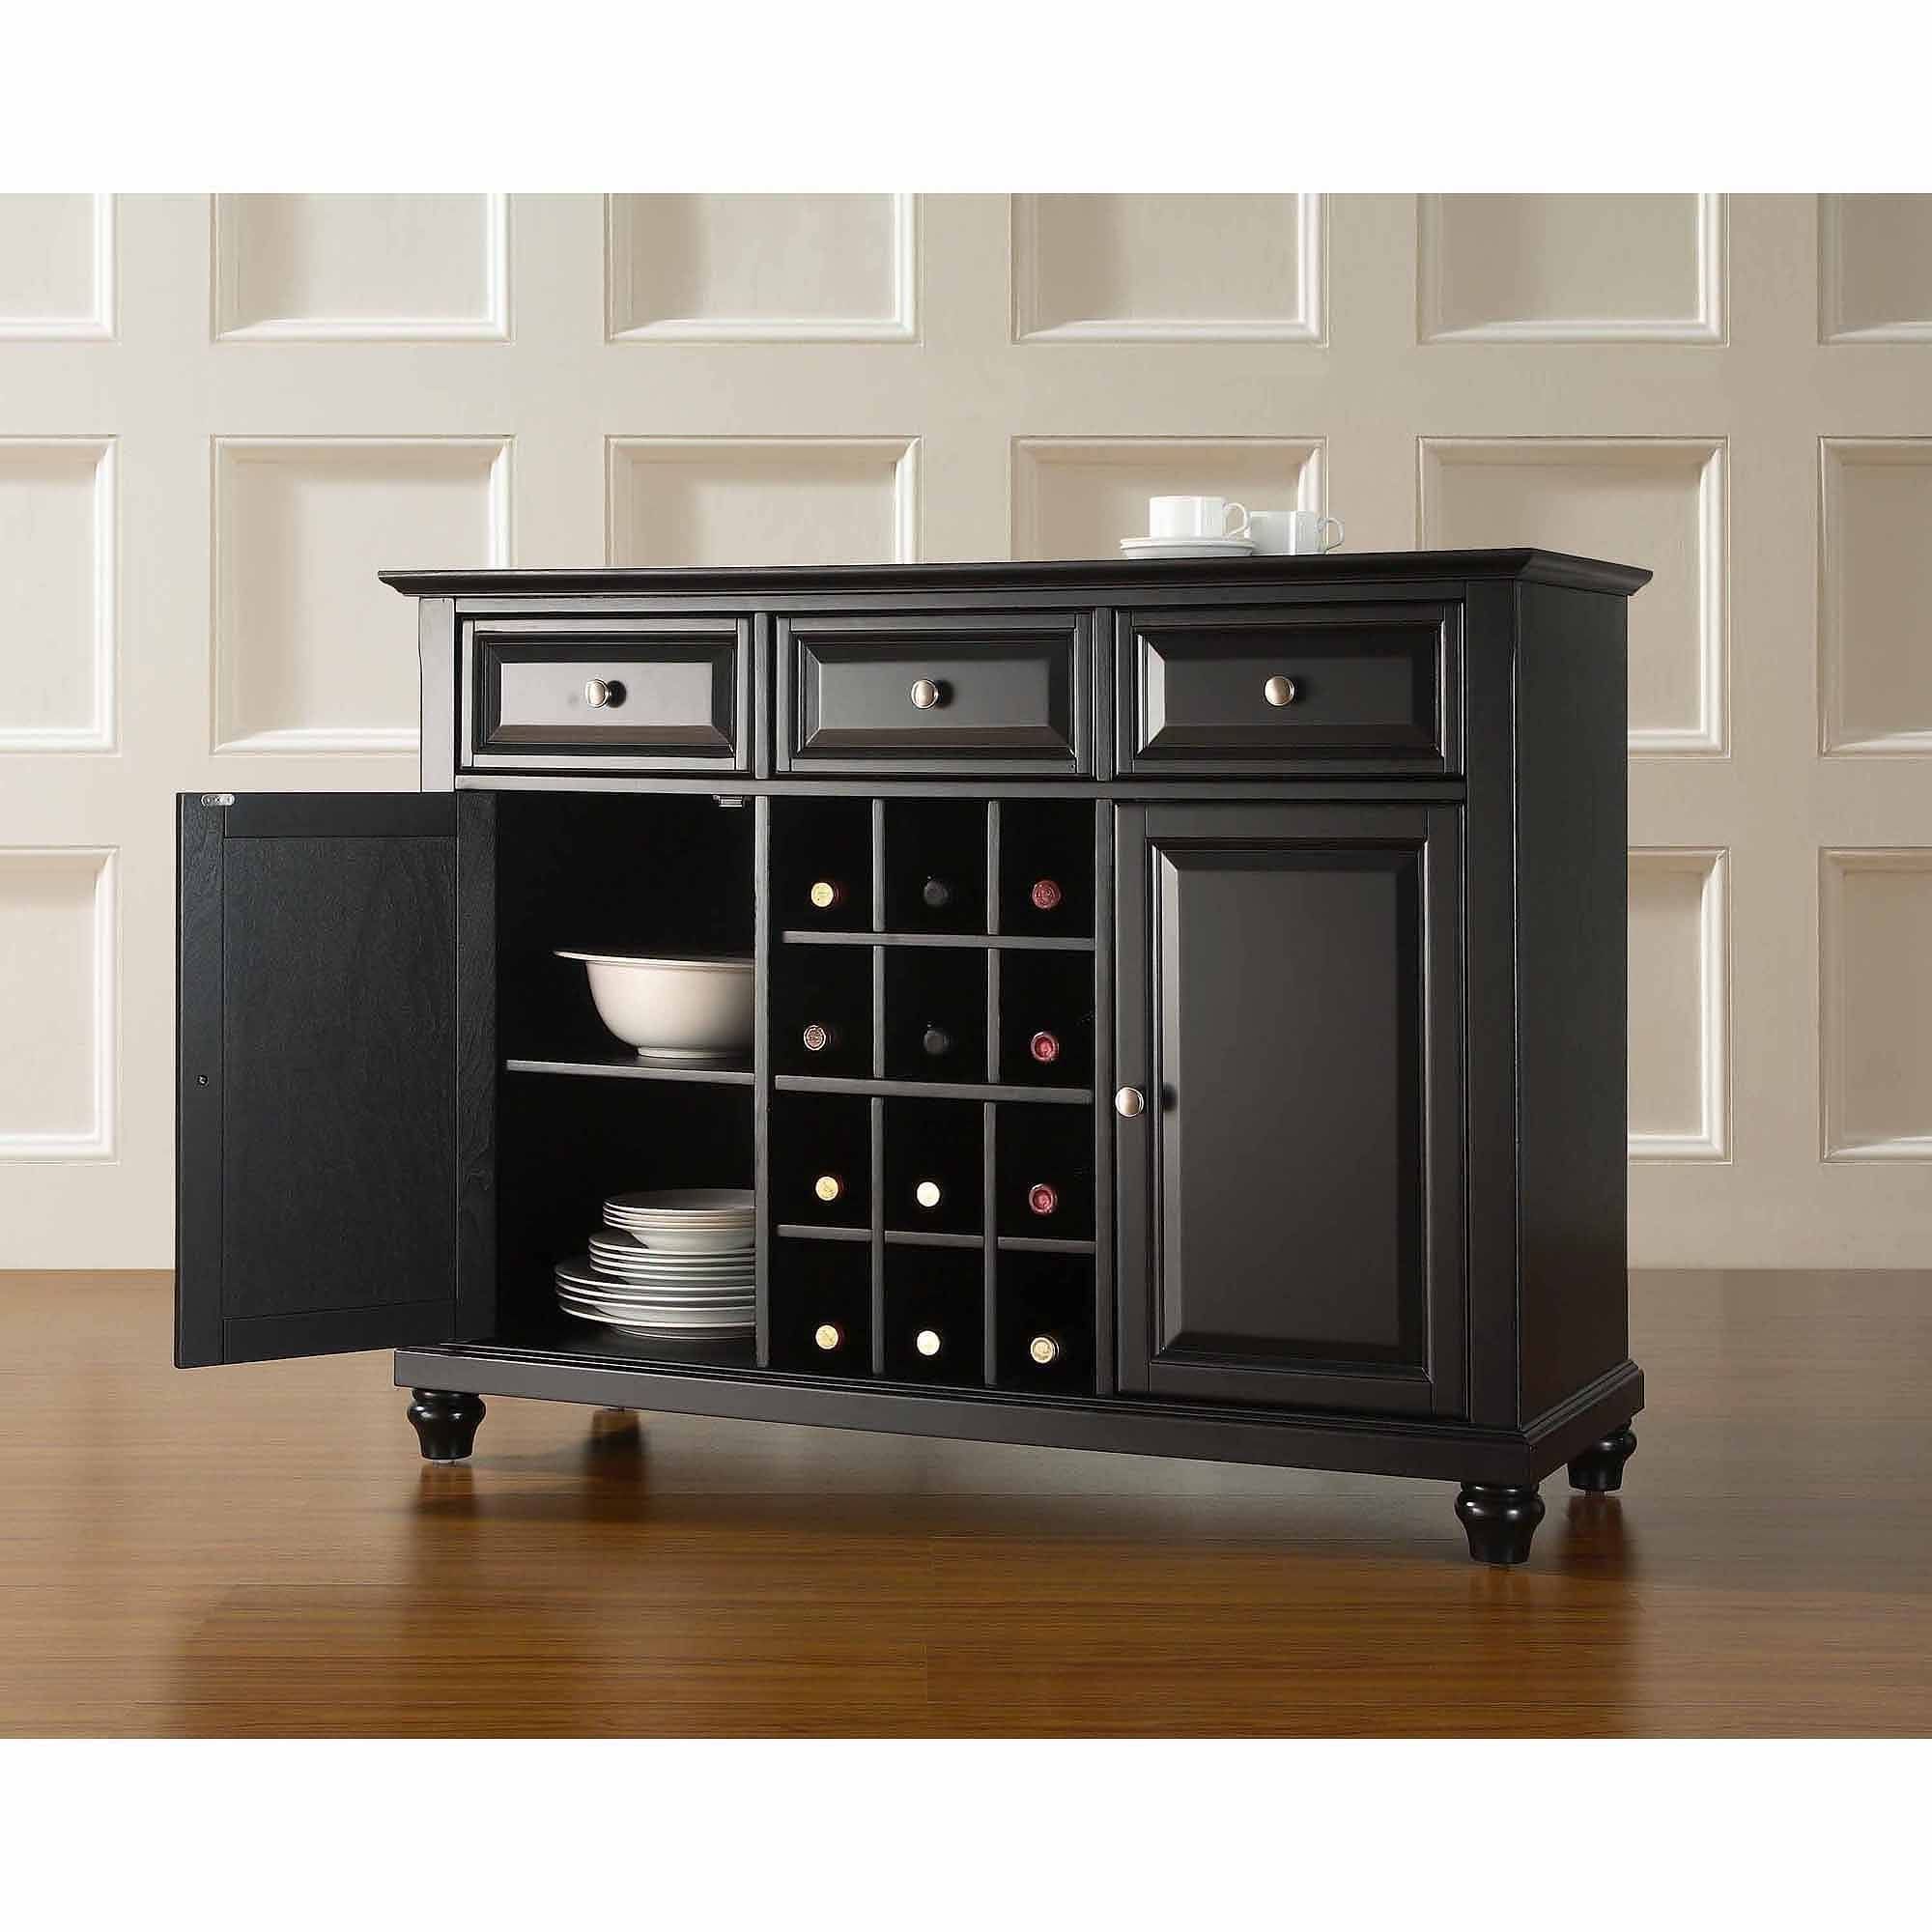 Sideboards. Awesome Server Buffet Cabinet: Server Buffet Cabinet Intended For Cream Kitchen Sideboards (Photo 10 of 30)